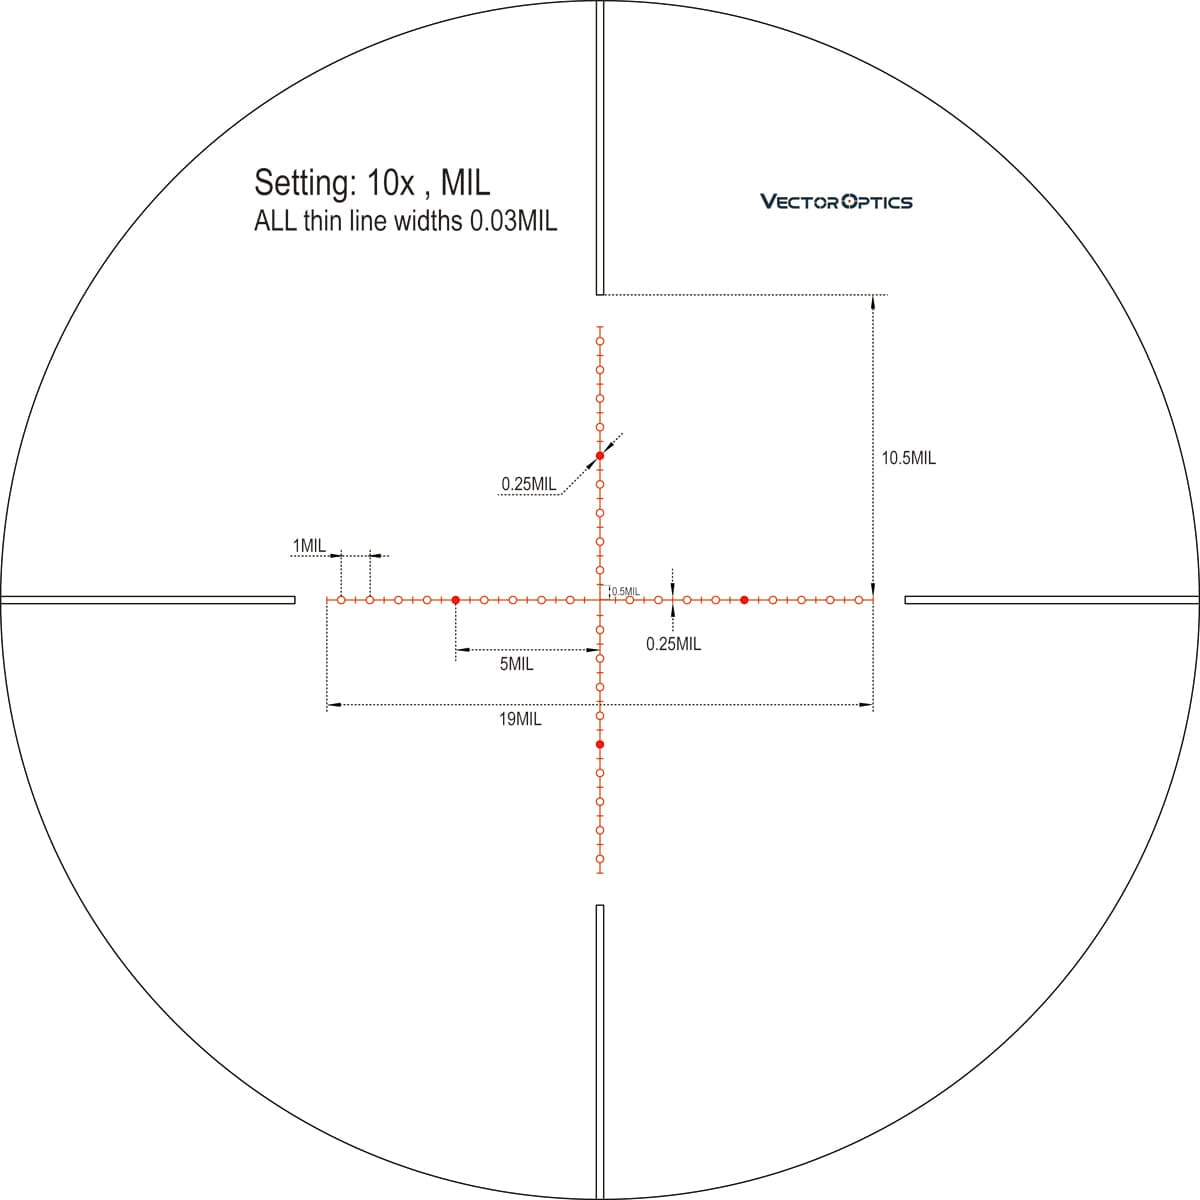 Continental 5-30x56 SFP Riflescope For Hunting reticle